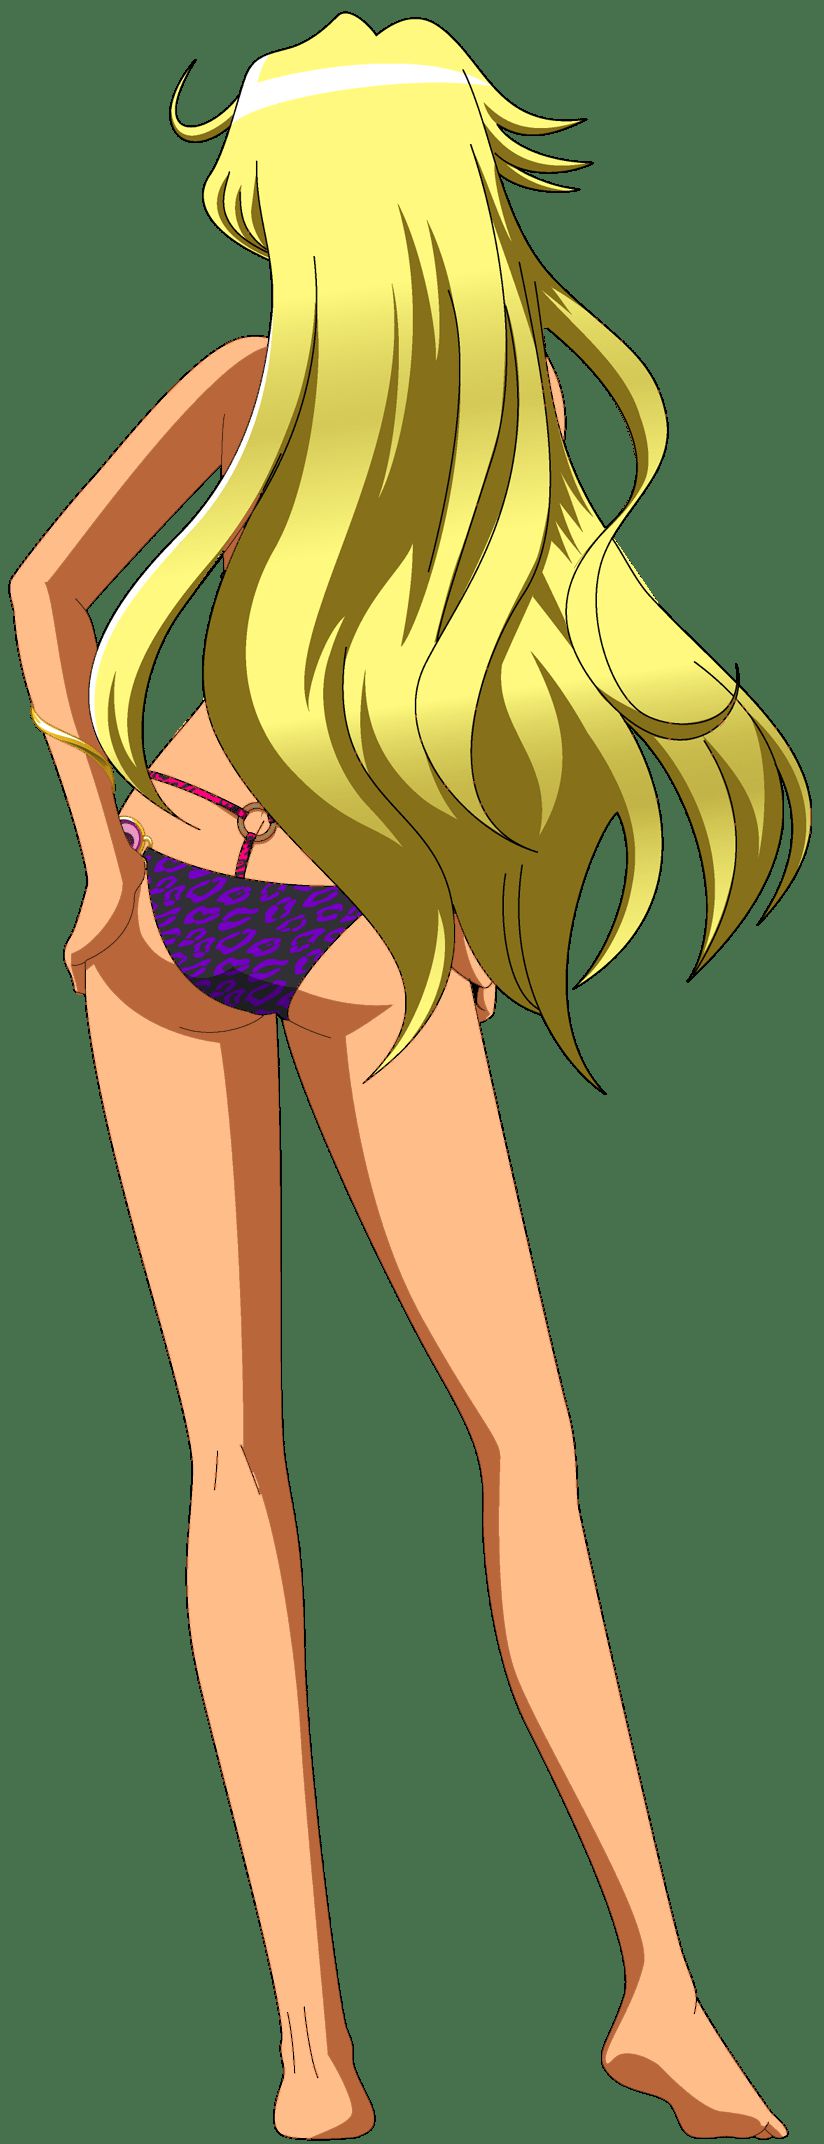 [Anime character material] png background of animated characters erotic images that 161 32